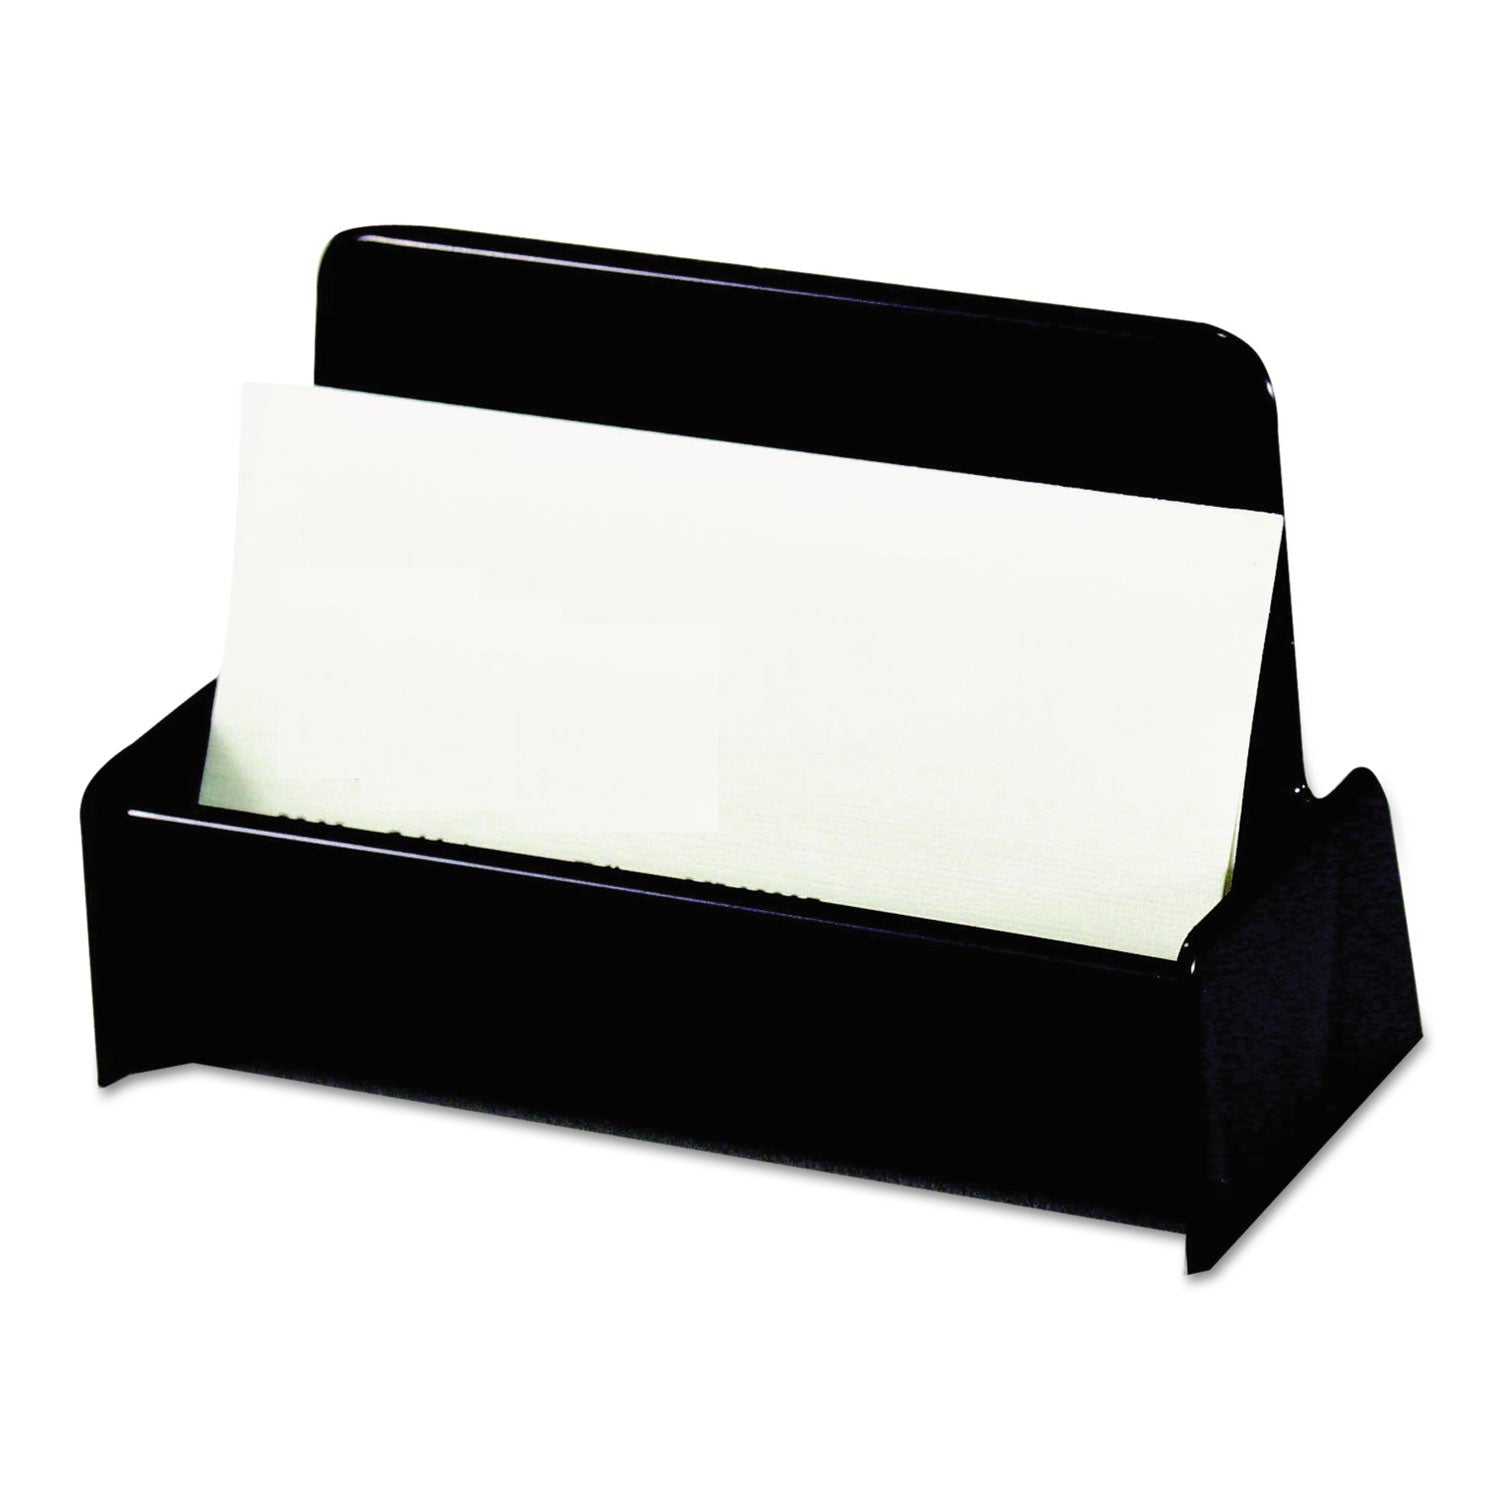 Business Card Holder, Holds 50 2 x 3.5 Cards, 3.75 x 1.81 x 1.38, Plastic, Black - 